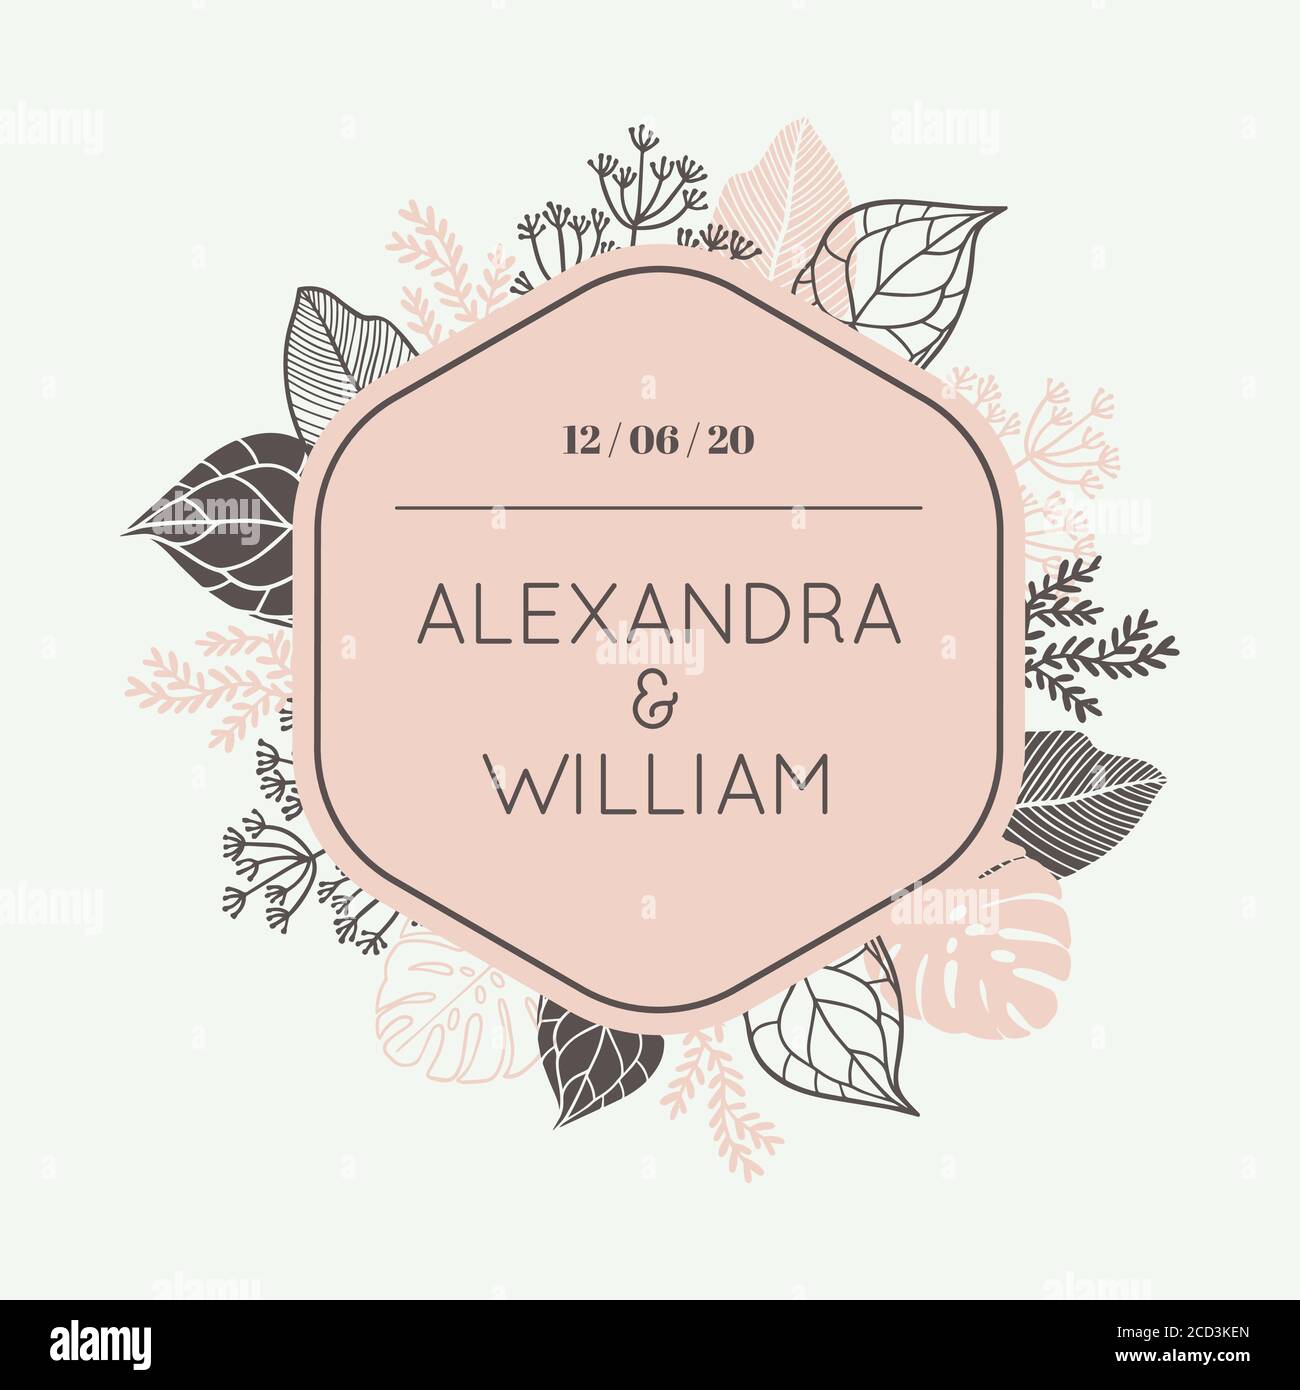 Wedding Invitation card. Frame with space for the name of the couple and other information. Floral background with leaves. Flat and vintage style temp Stock Vector